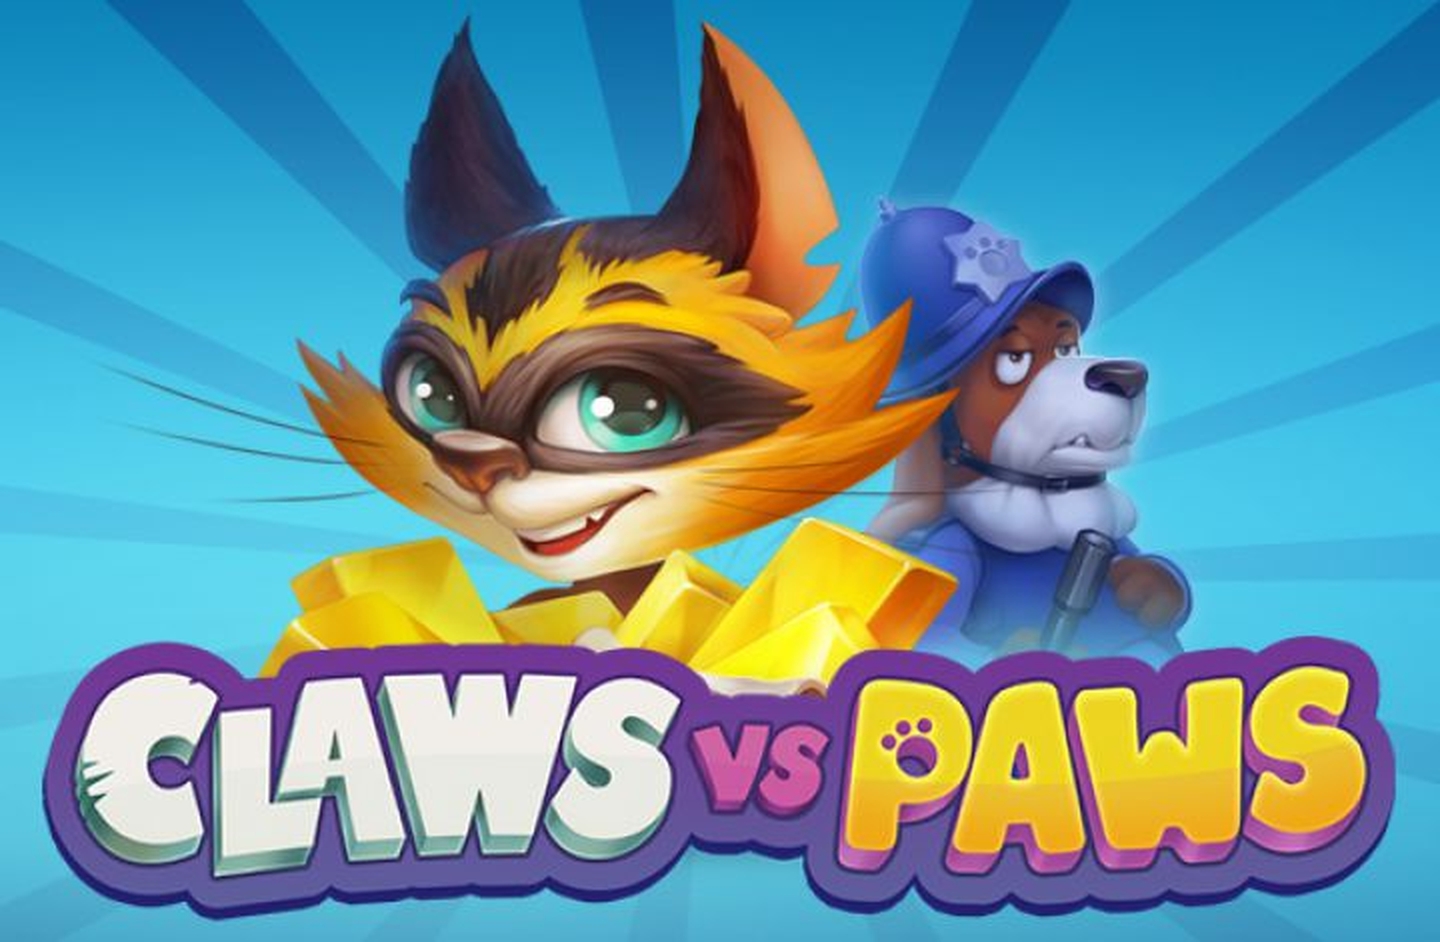 Claws vs Paws demo